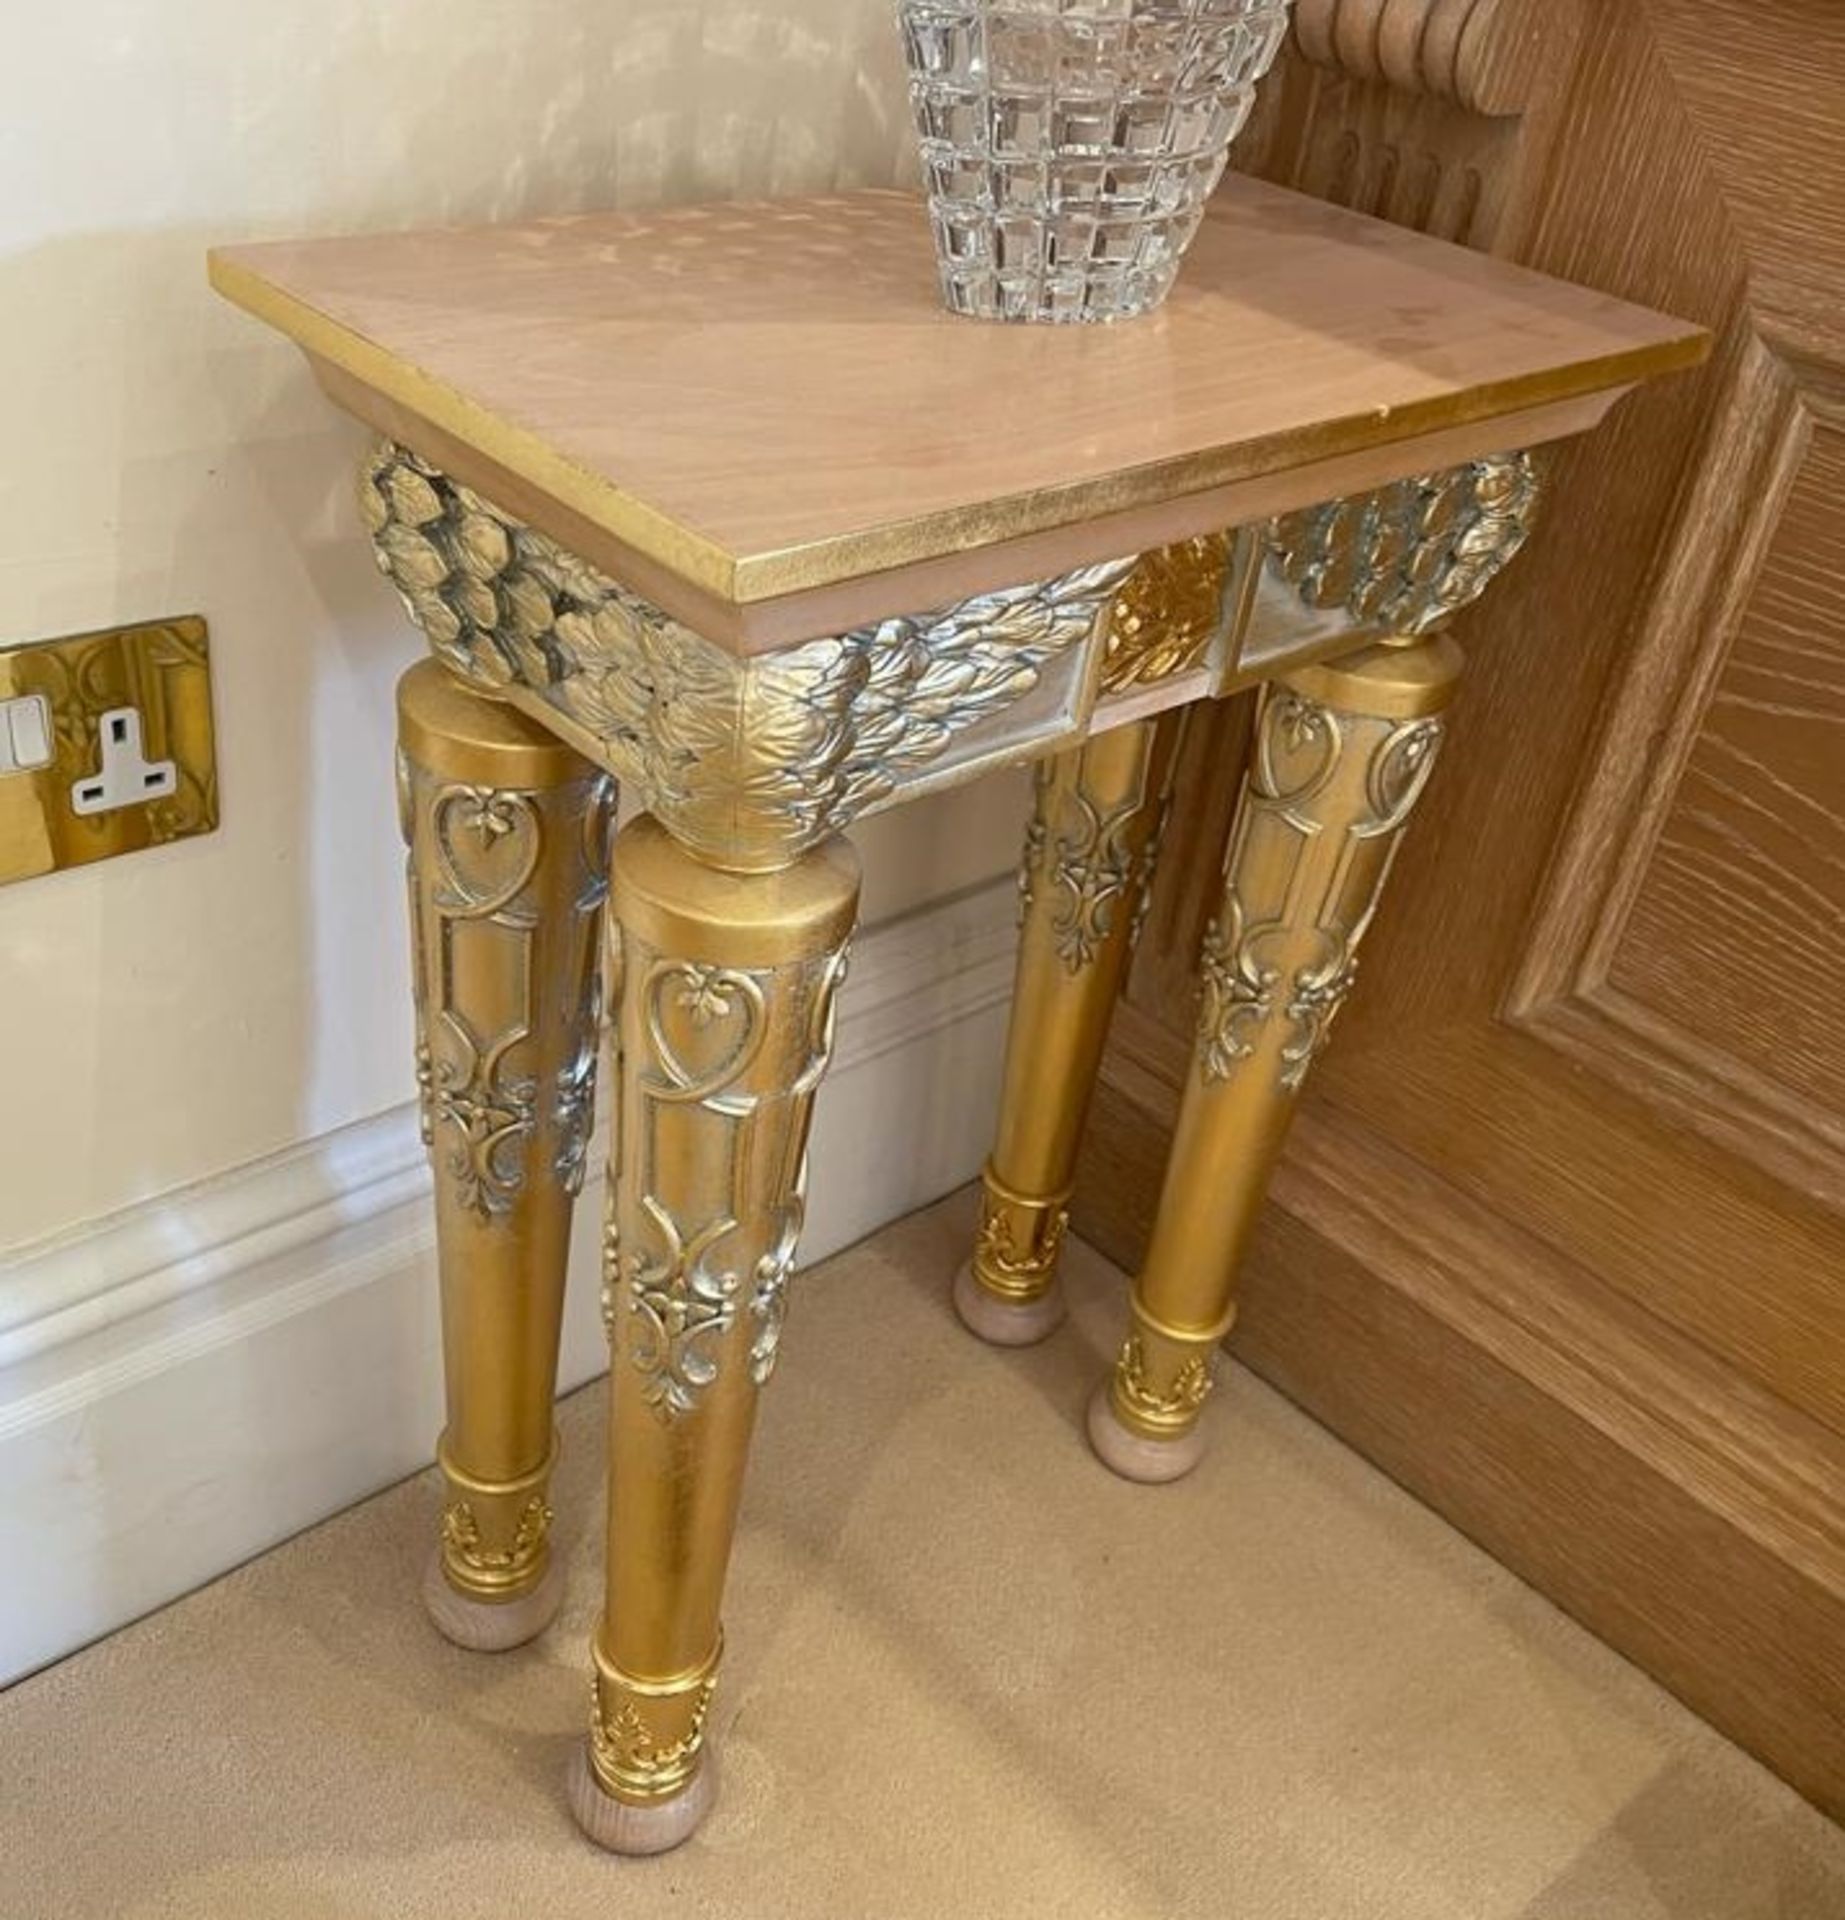 1 x Hand Carved Ornate Lamp Tables Complimented With Birchwood Veneer, Golden Pillar Legs, Carved - Image 8 of 10